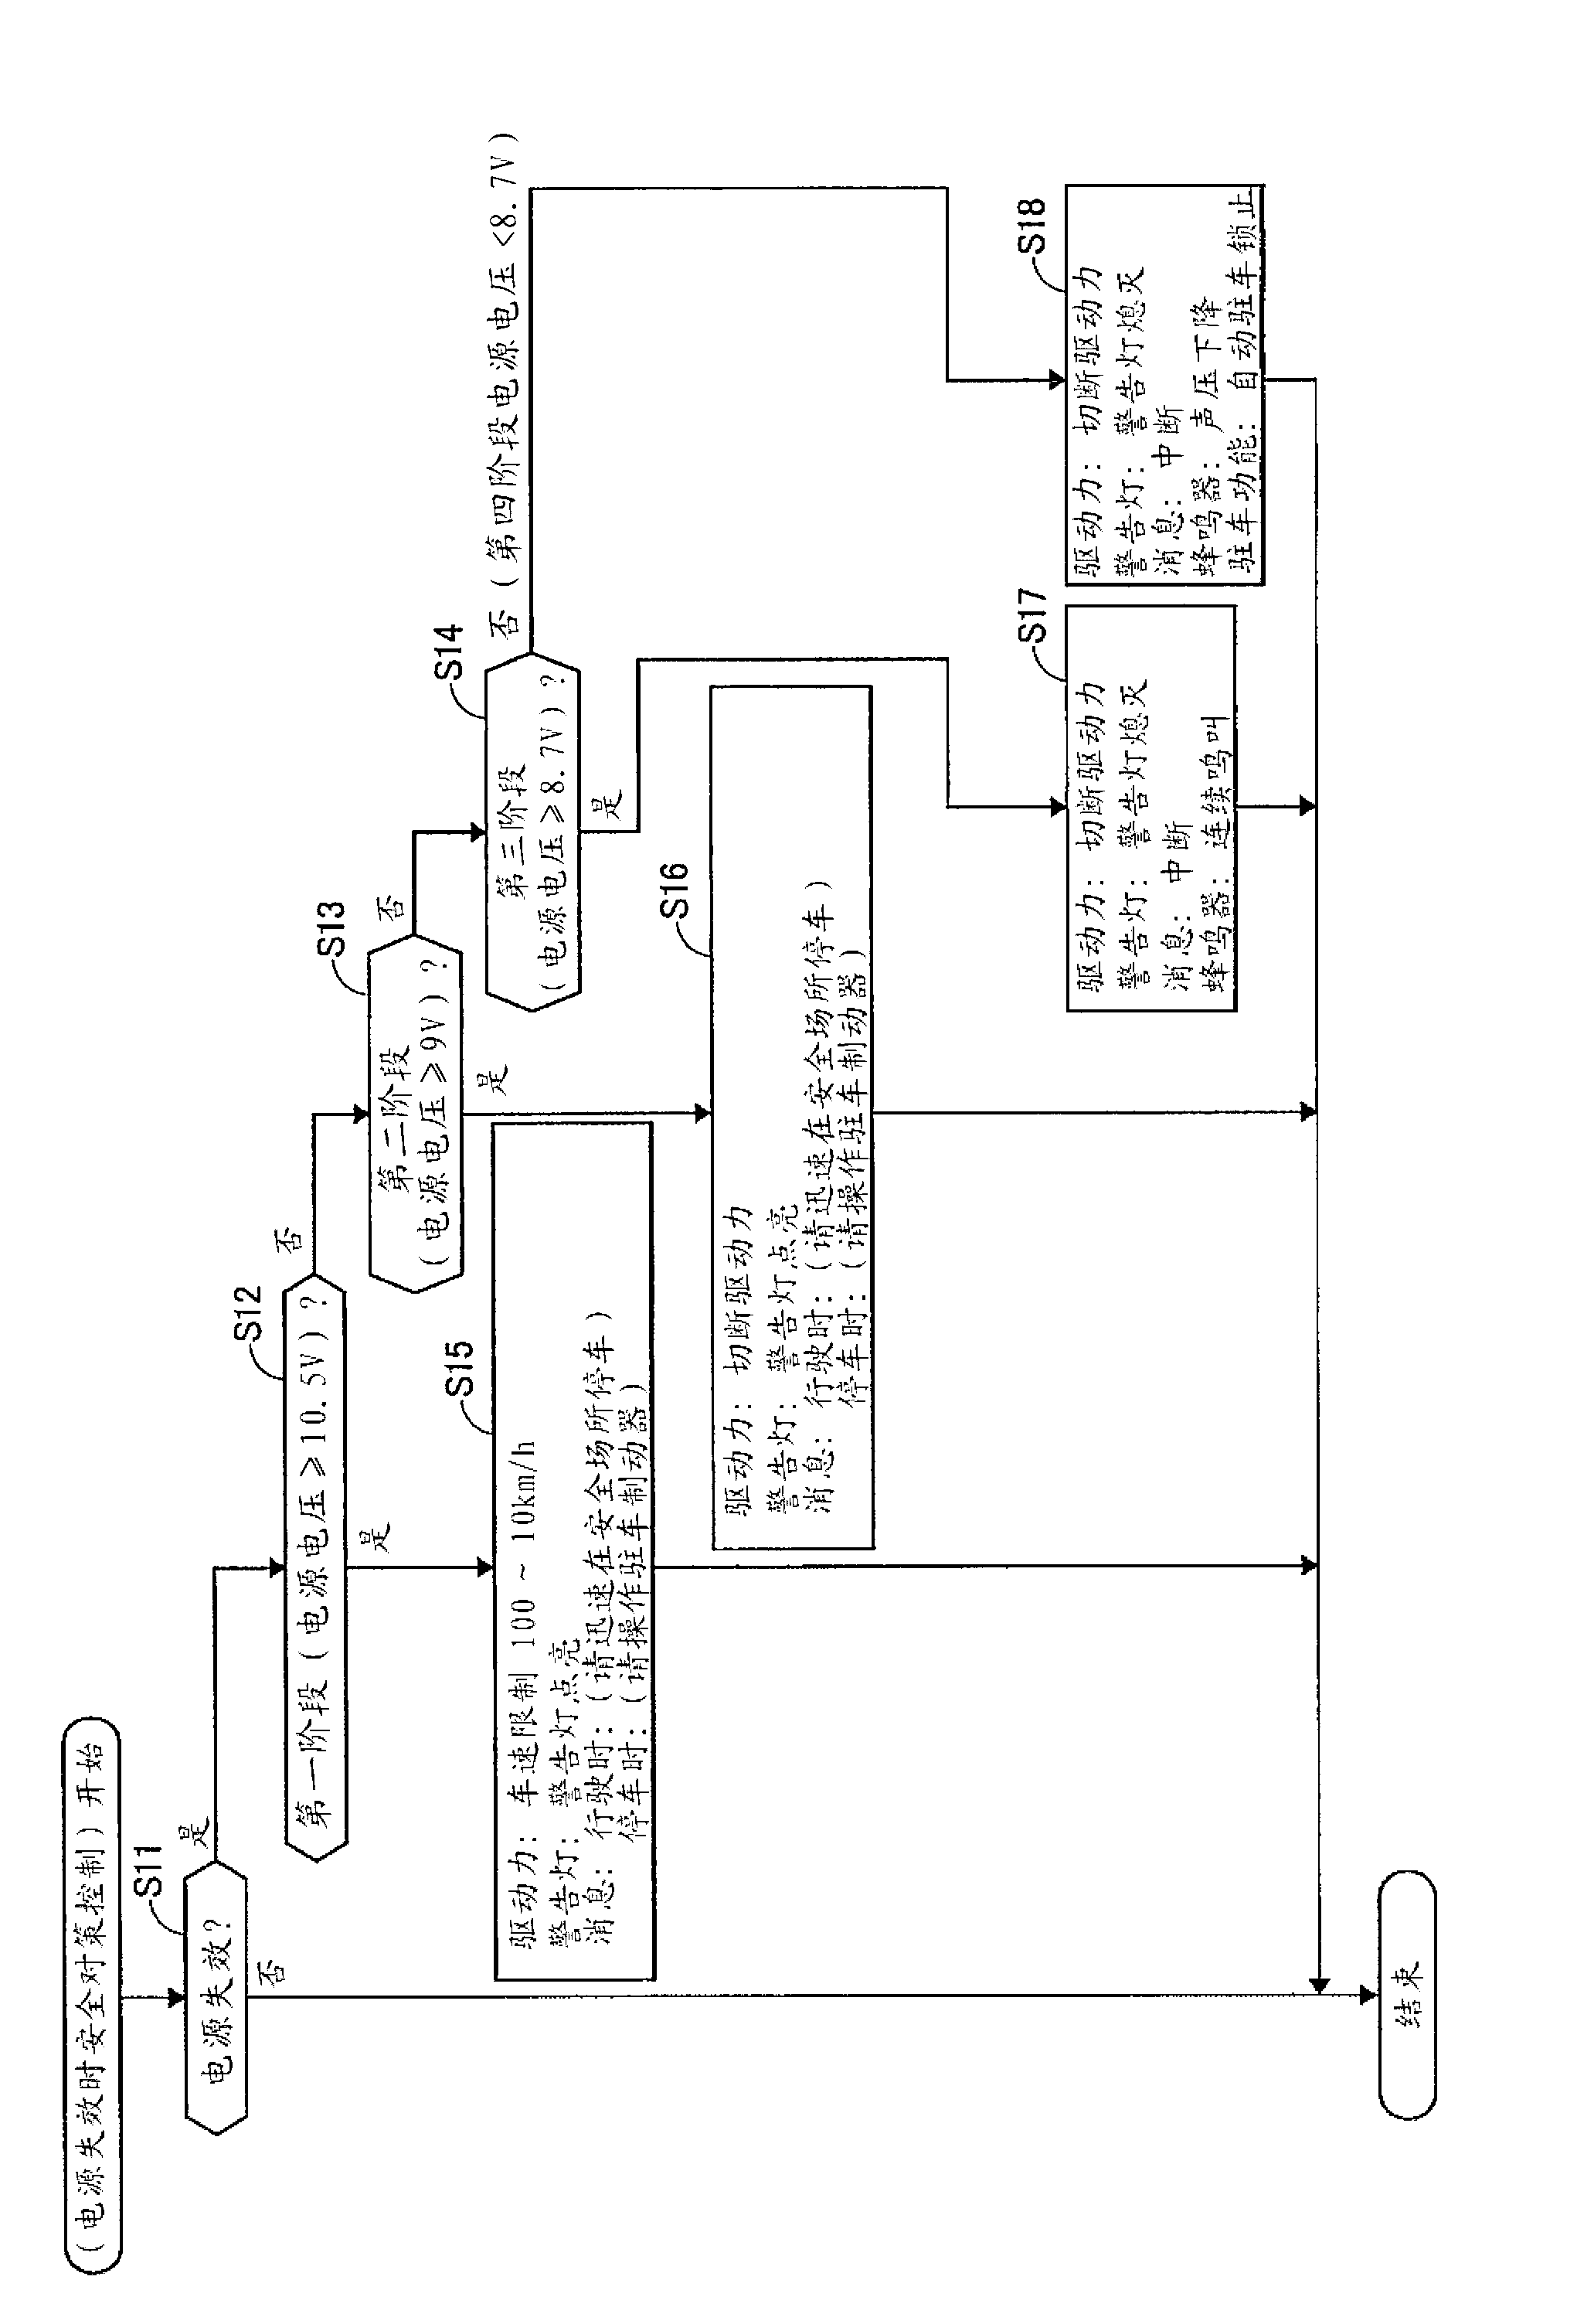 Control device for use in vehicle, adapted to control safety measures against electric power supply failure